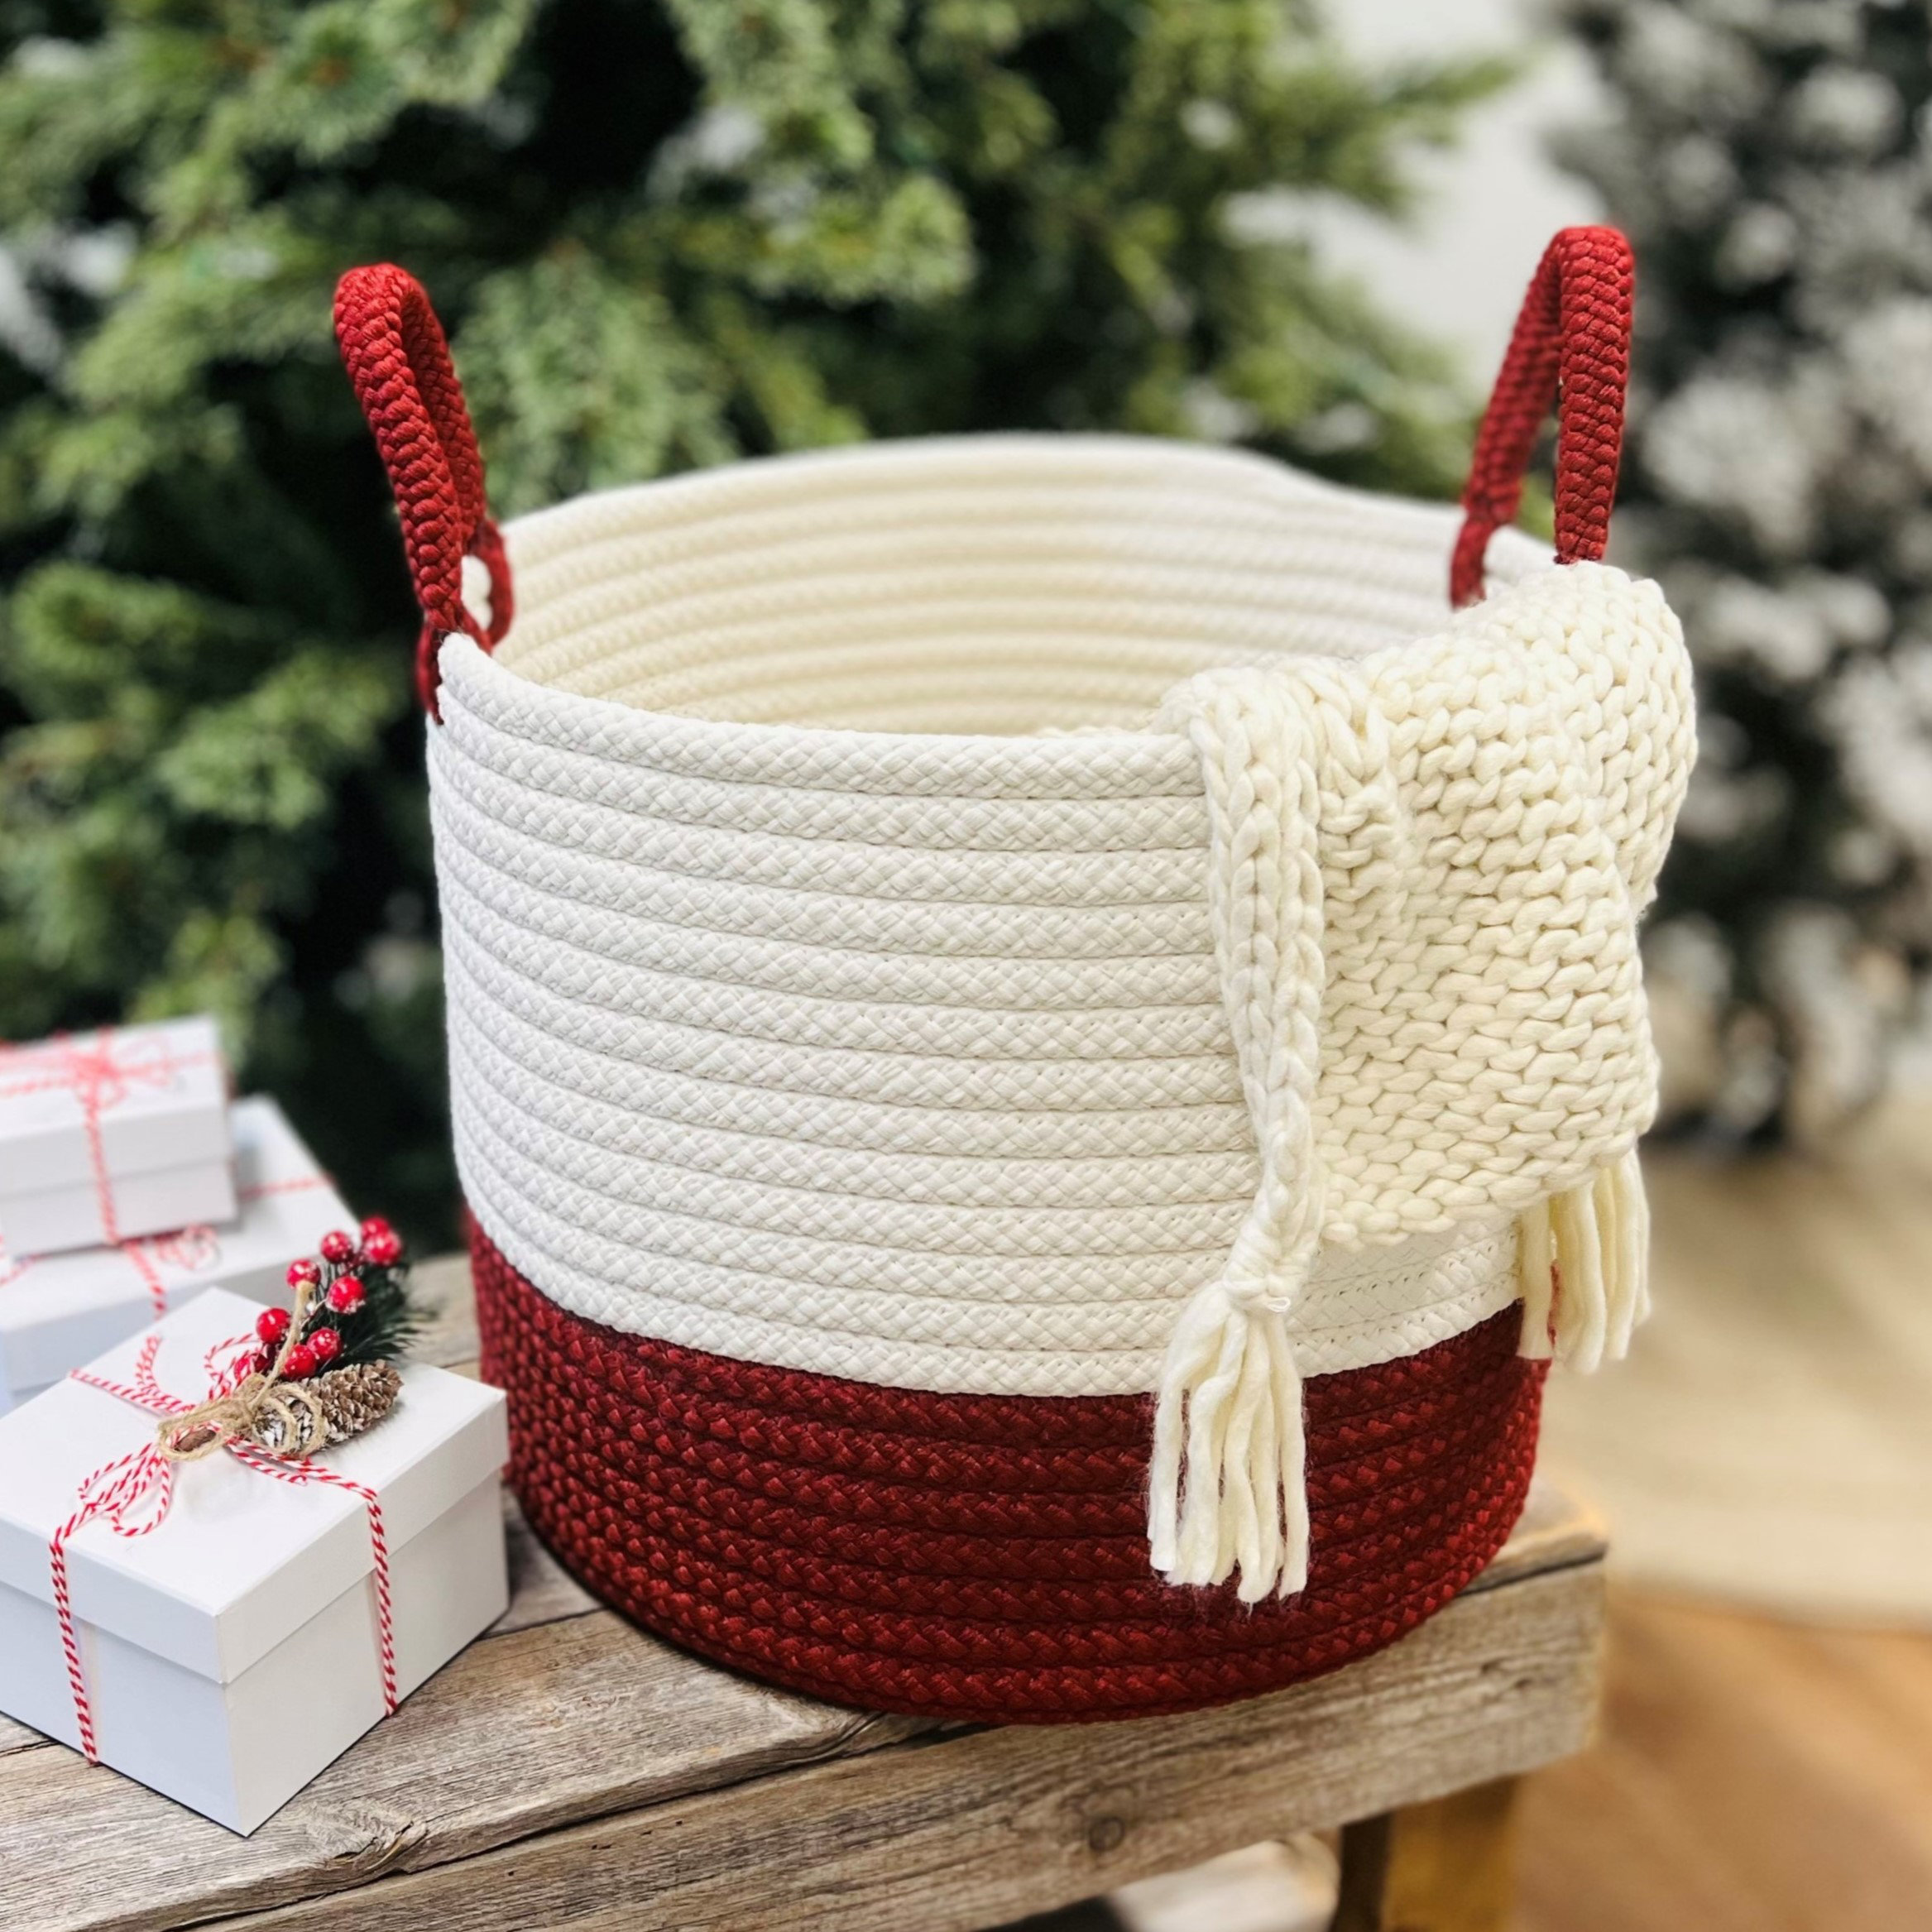 Colonial Mills Sleighbells Woven Holiday Basket - Red Multi 16x16x14